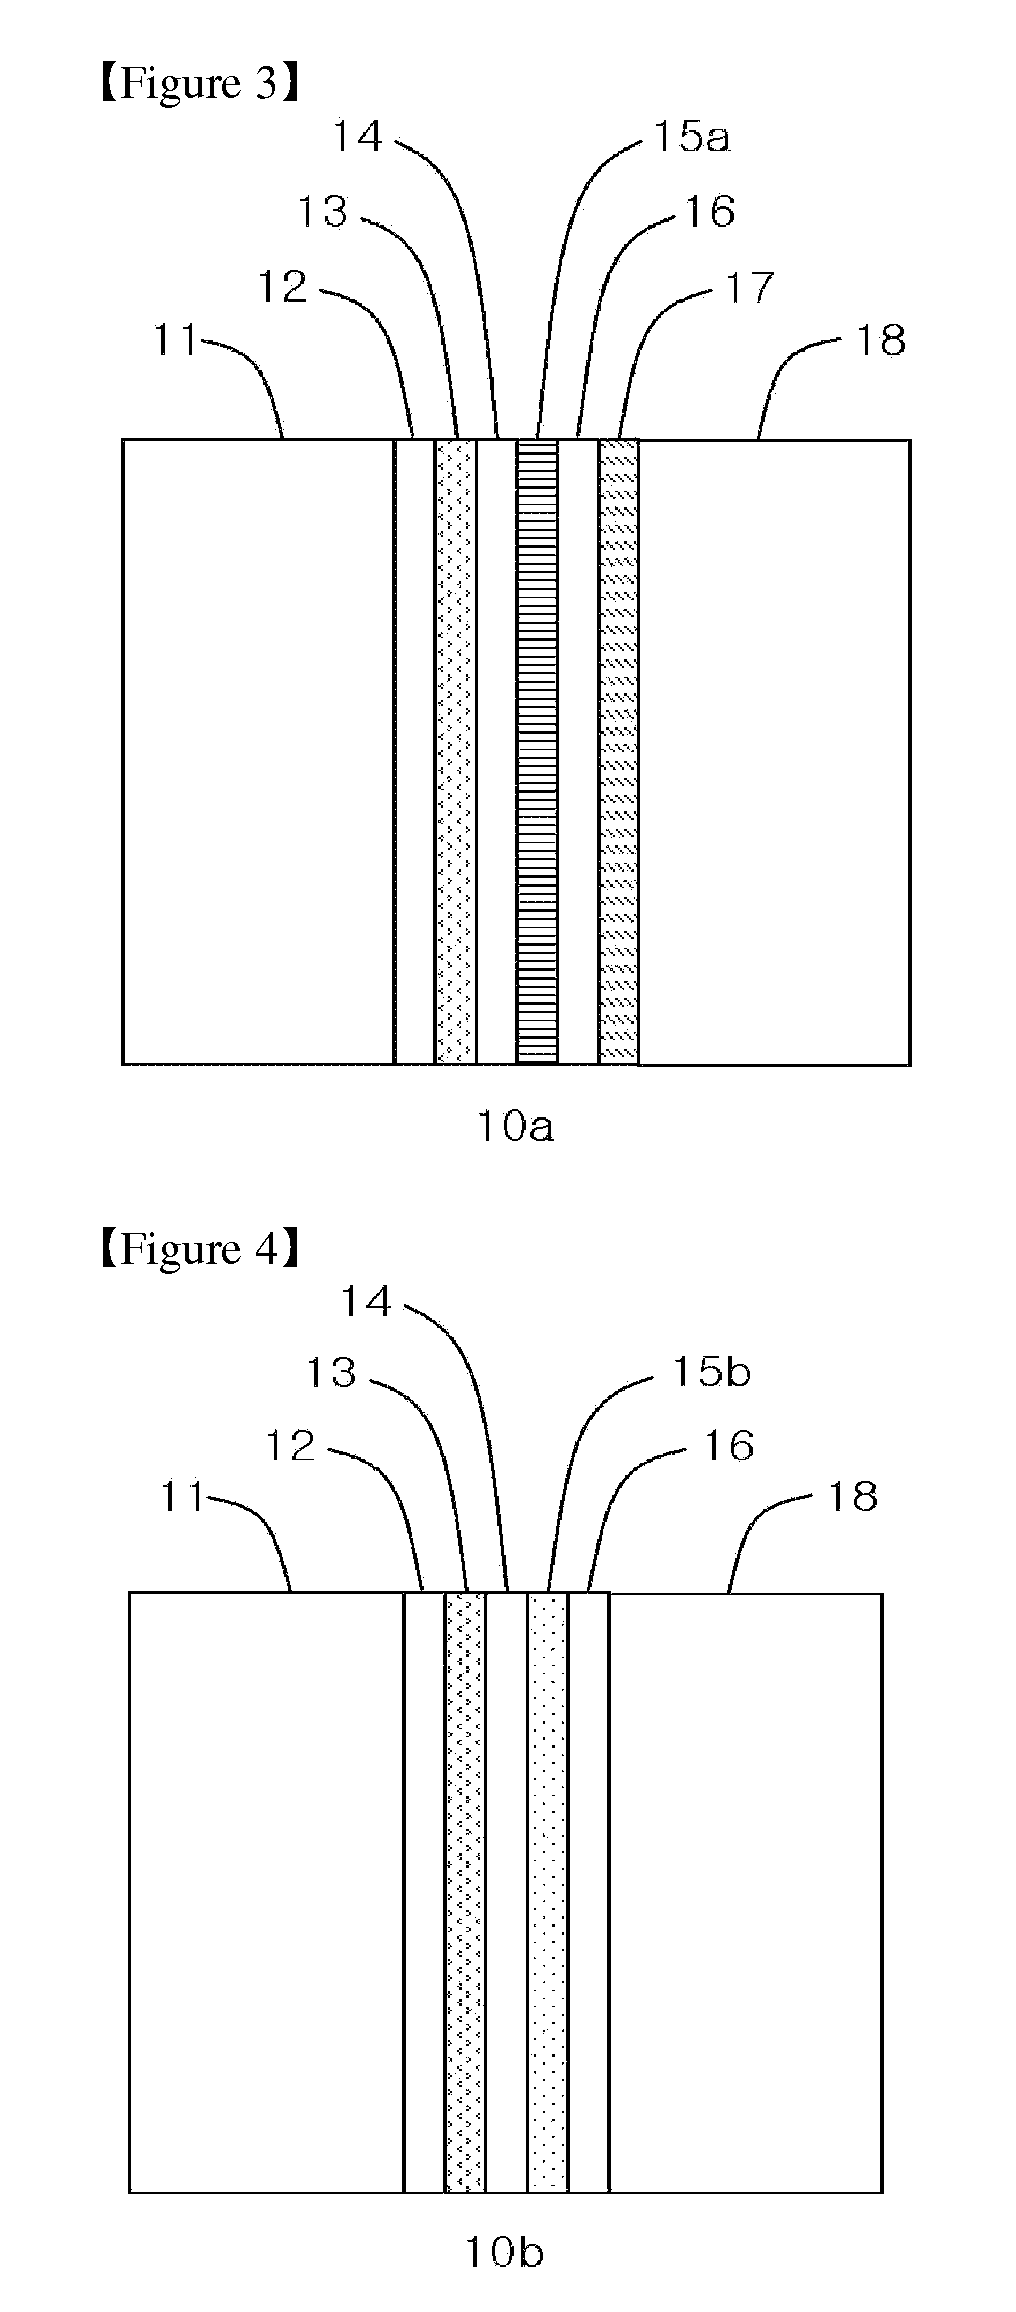 Solar cell module with layers of design for integration into buildings